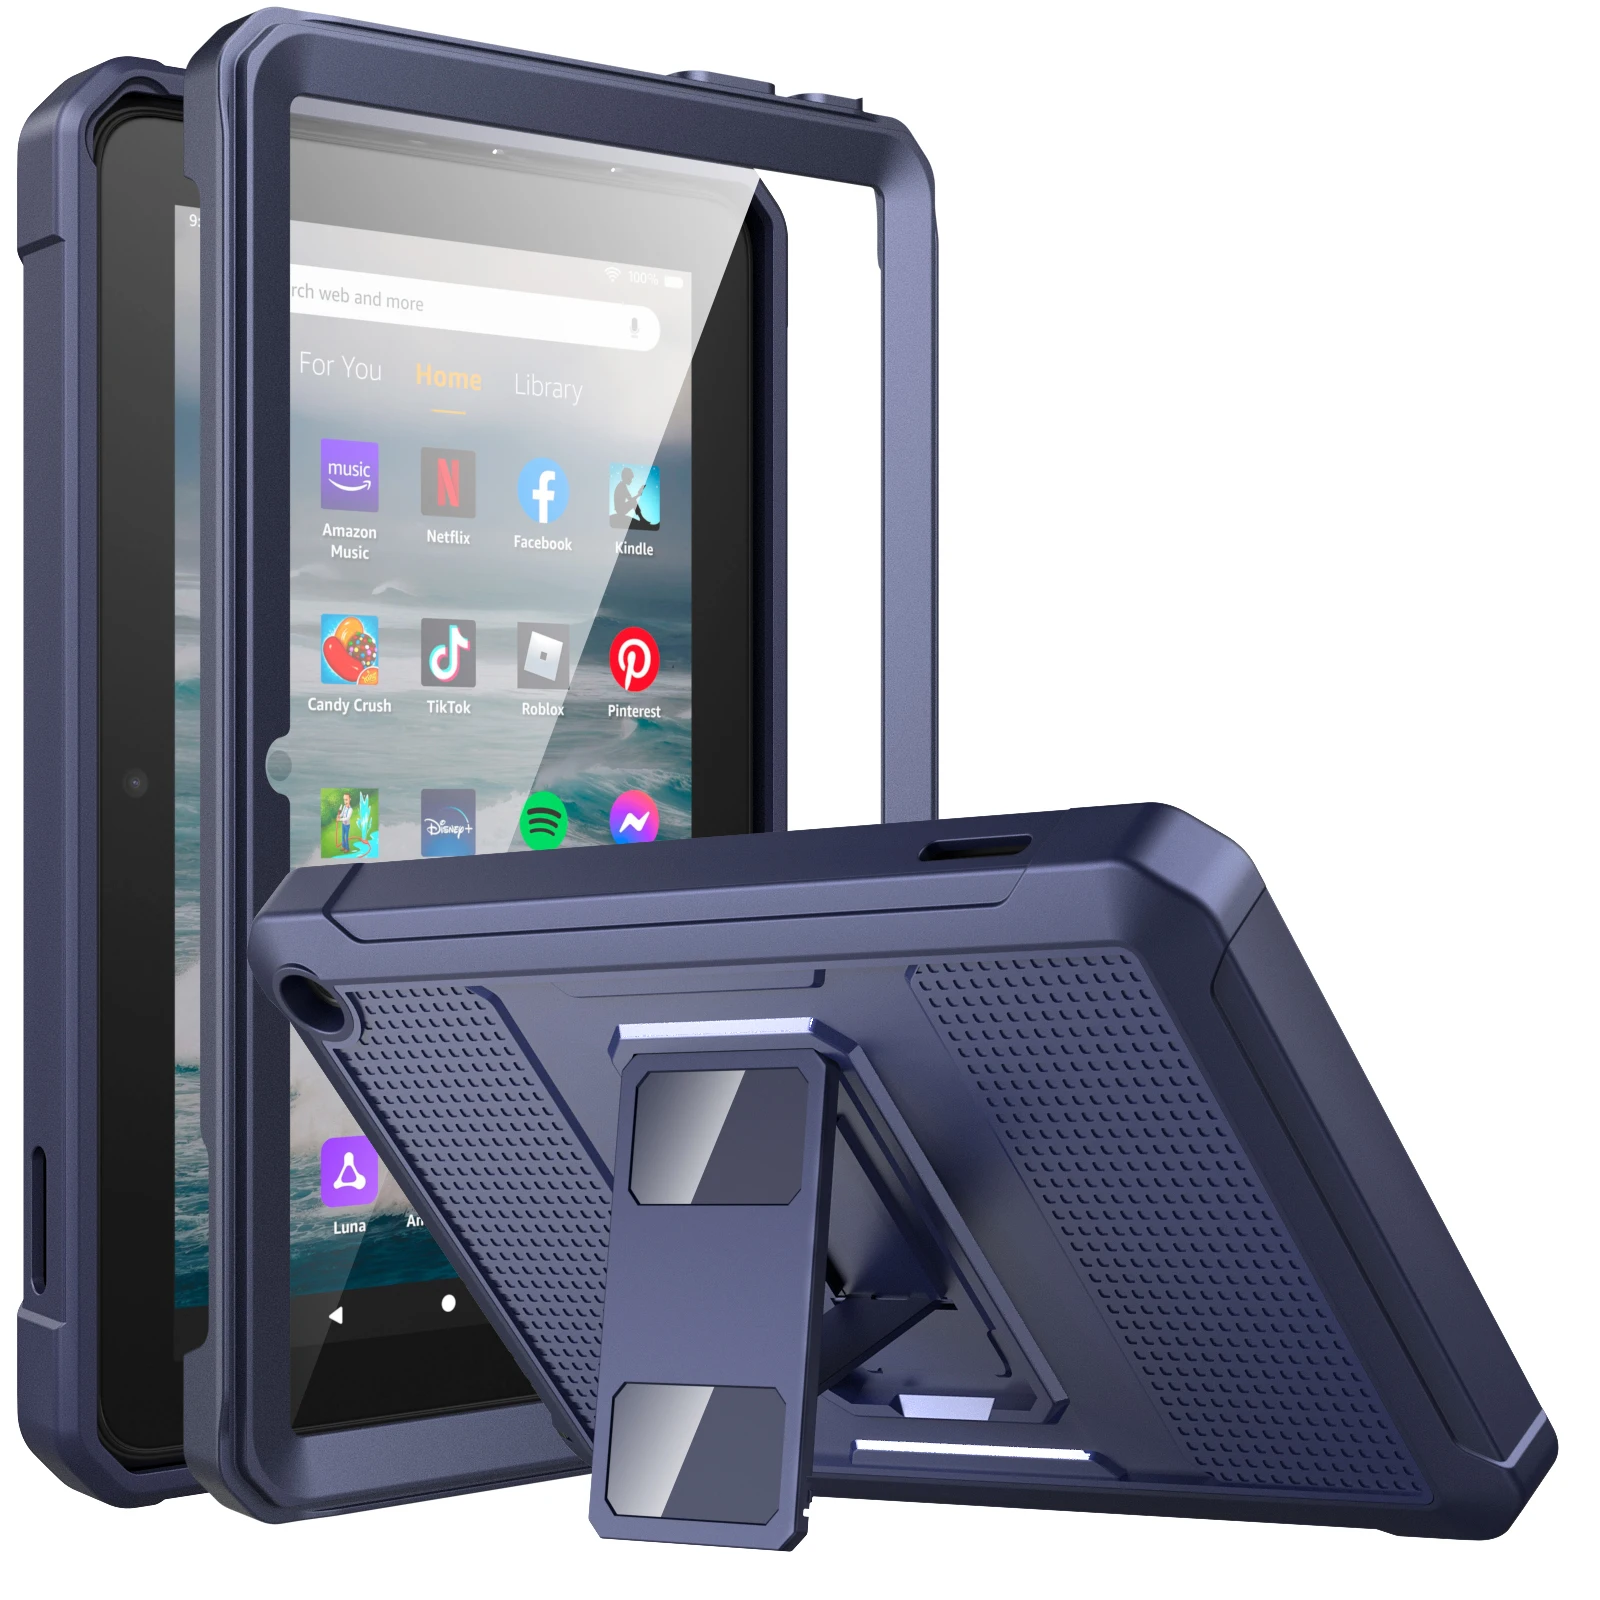 

Case For Amazon All-New Kindle Fire 7 Tablet (2022 Release-12th Generation) Latest Model 7",Full Body Rugged Hands-free Viewing